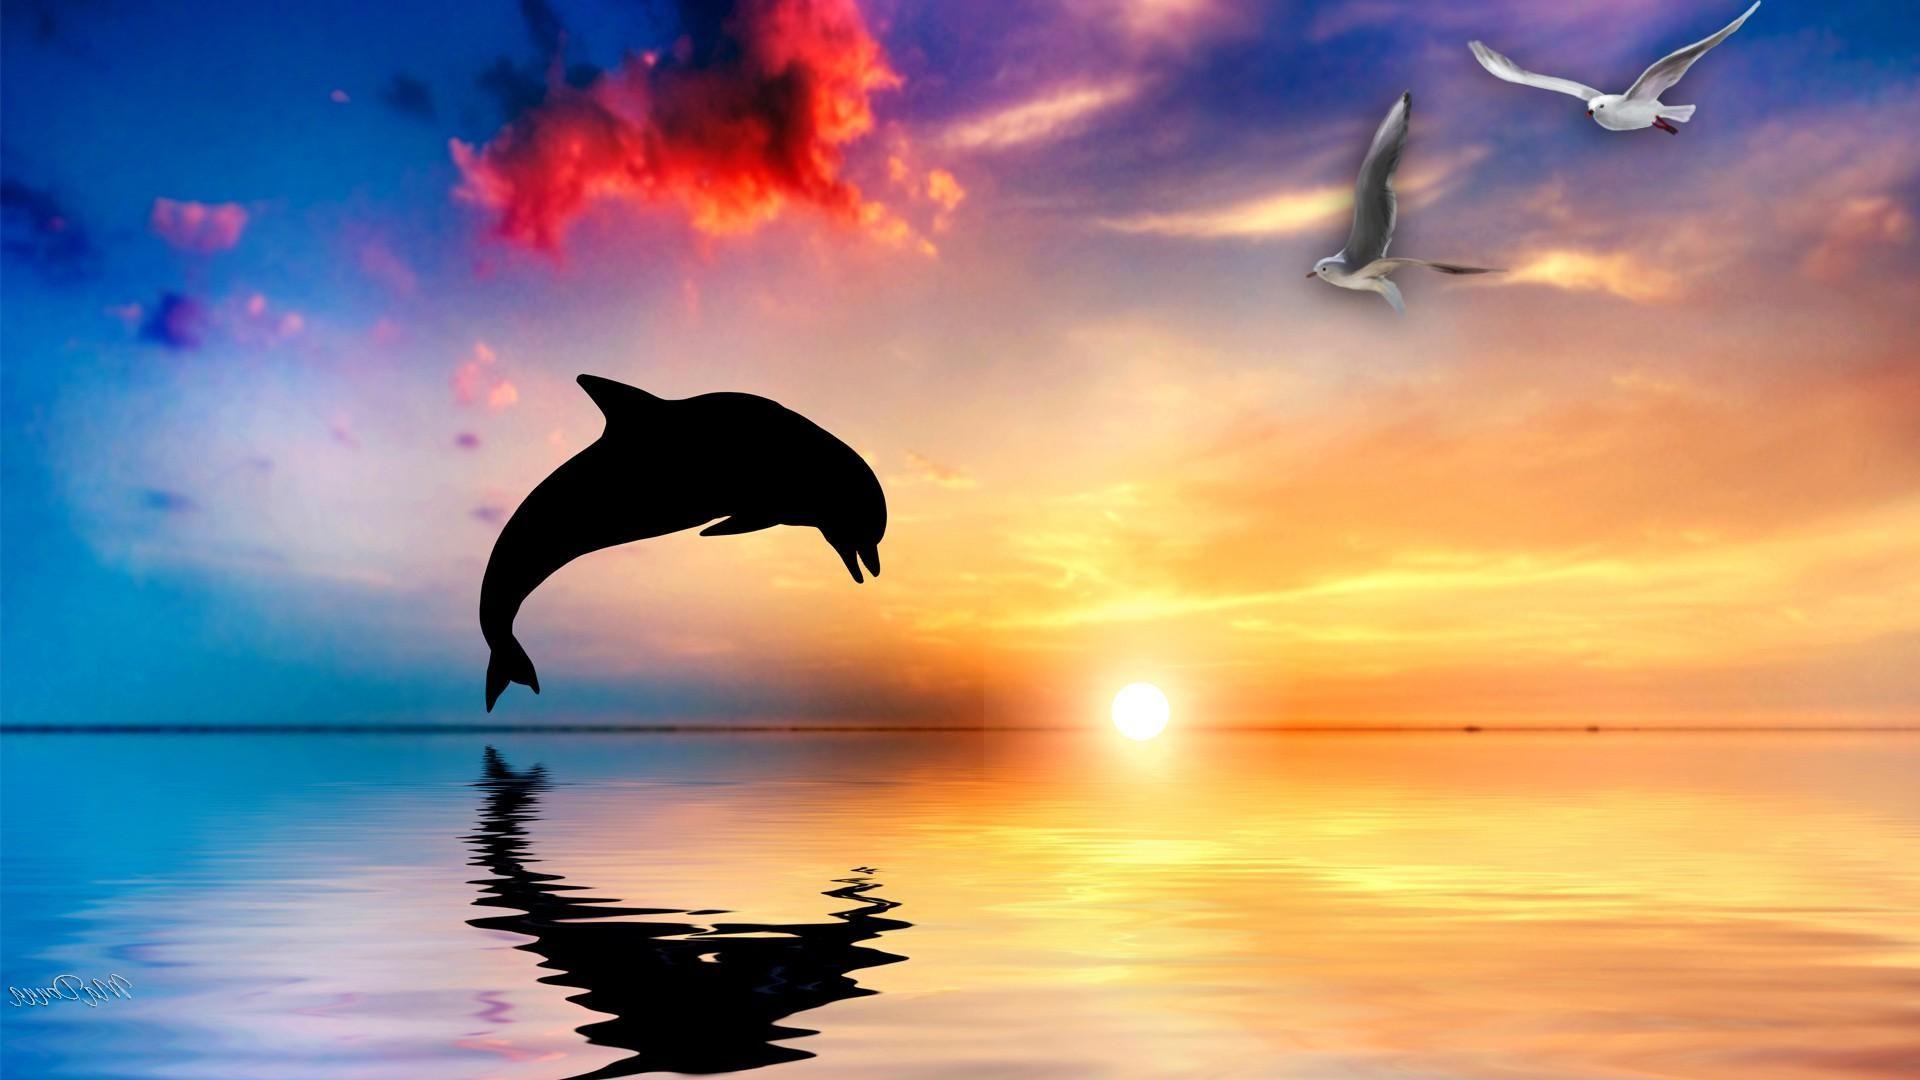 Wallpaper.wiki Abstract Dolphin Image PIC WPB004073